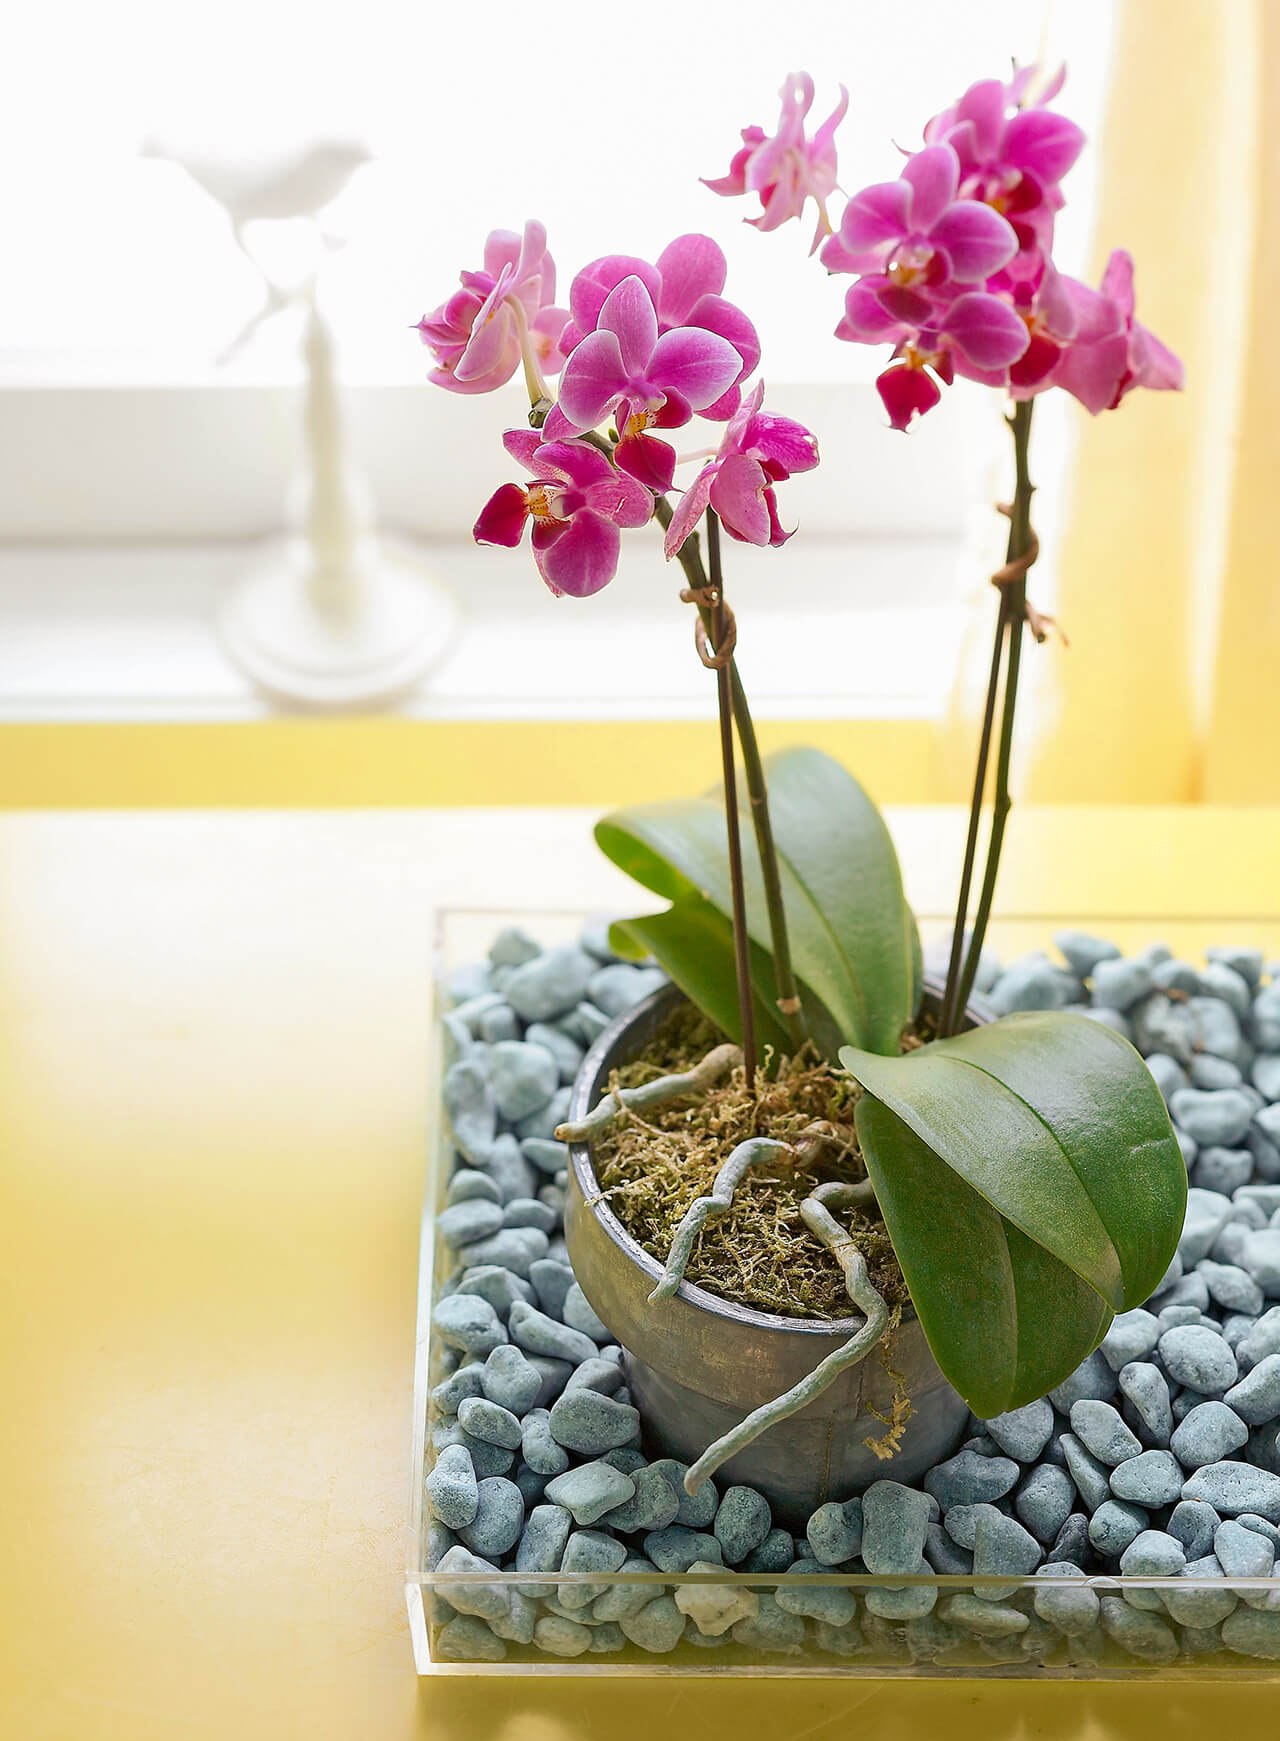 4 – Orchid 1